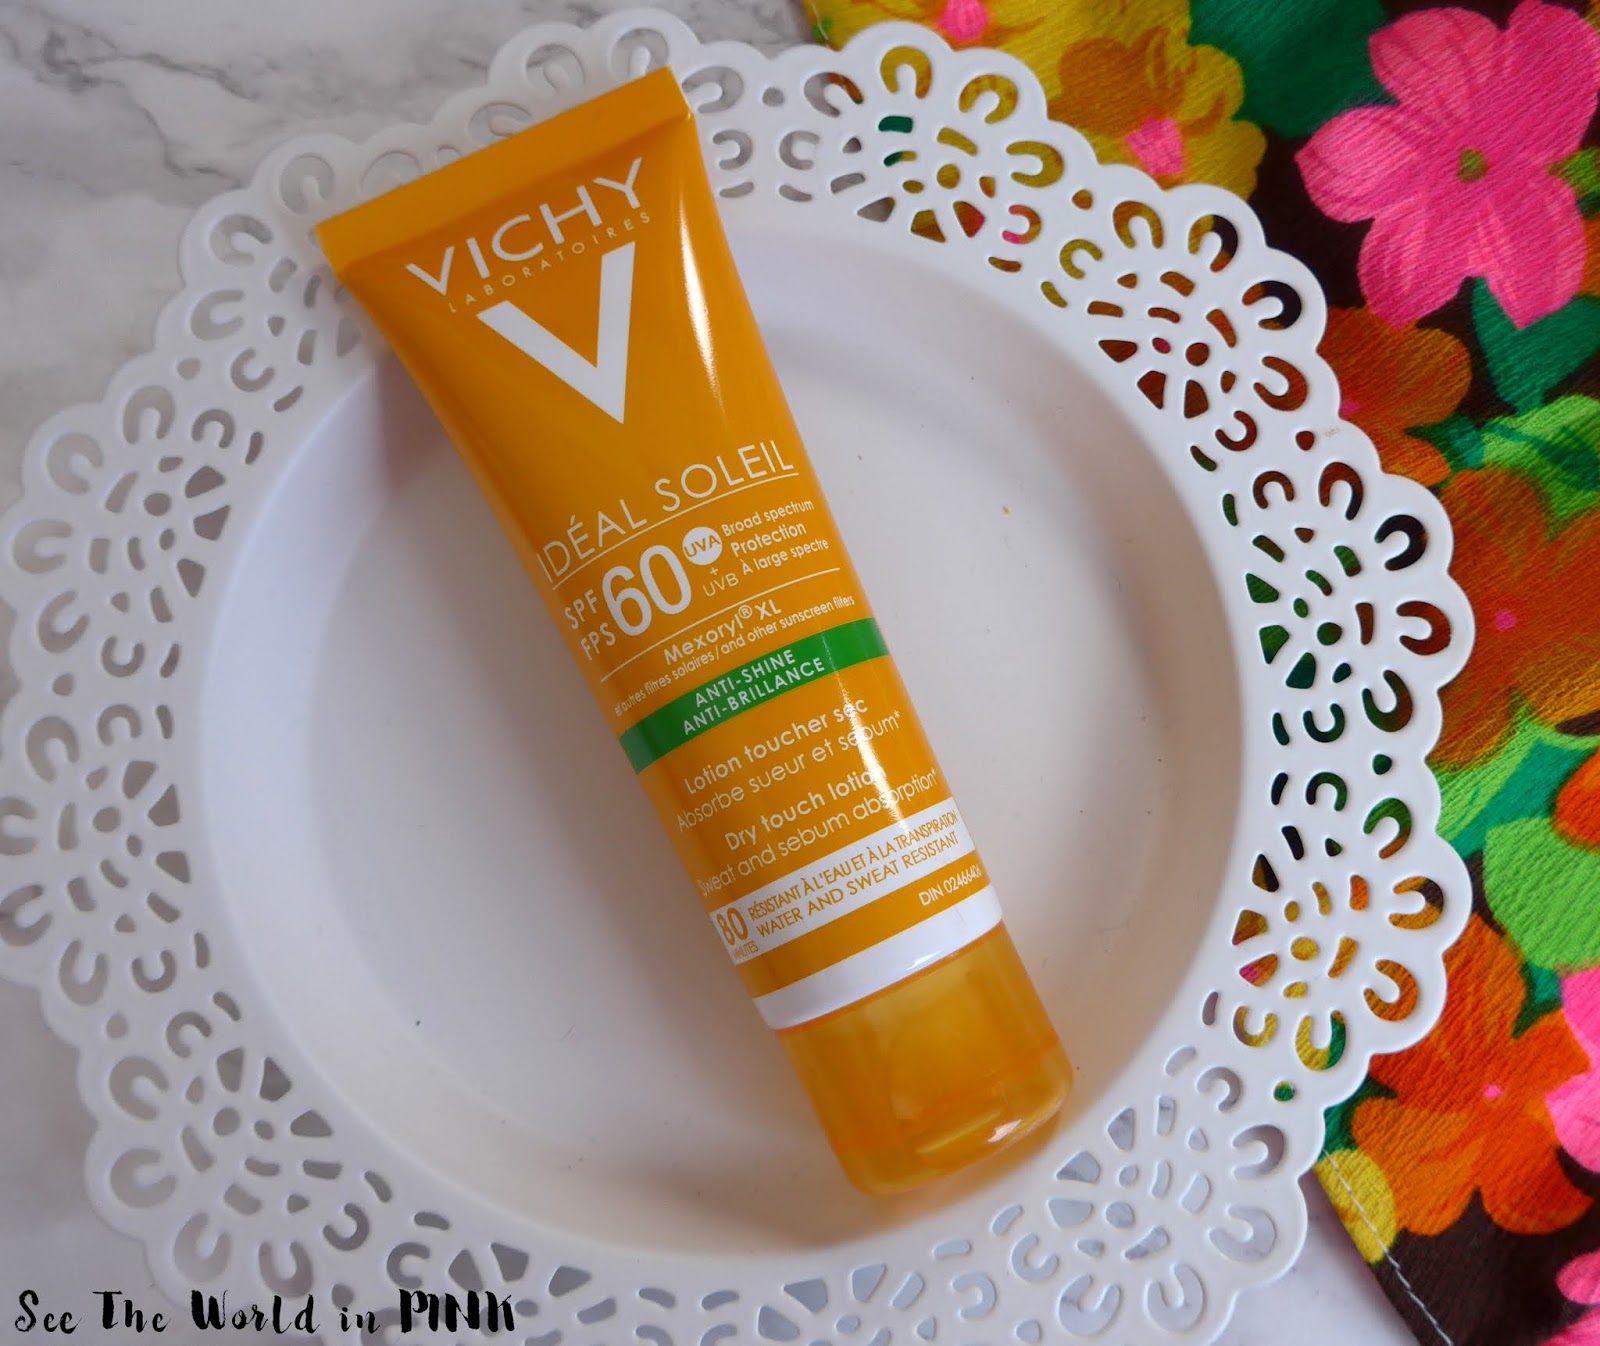 Vichy Ideal Soleil Anti-Shine Dry Touch Lotion SPF60 - Facial Sunscreen Review! 